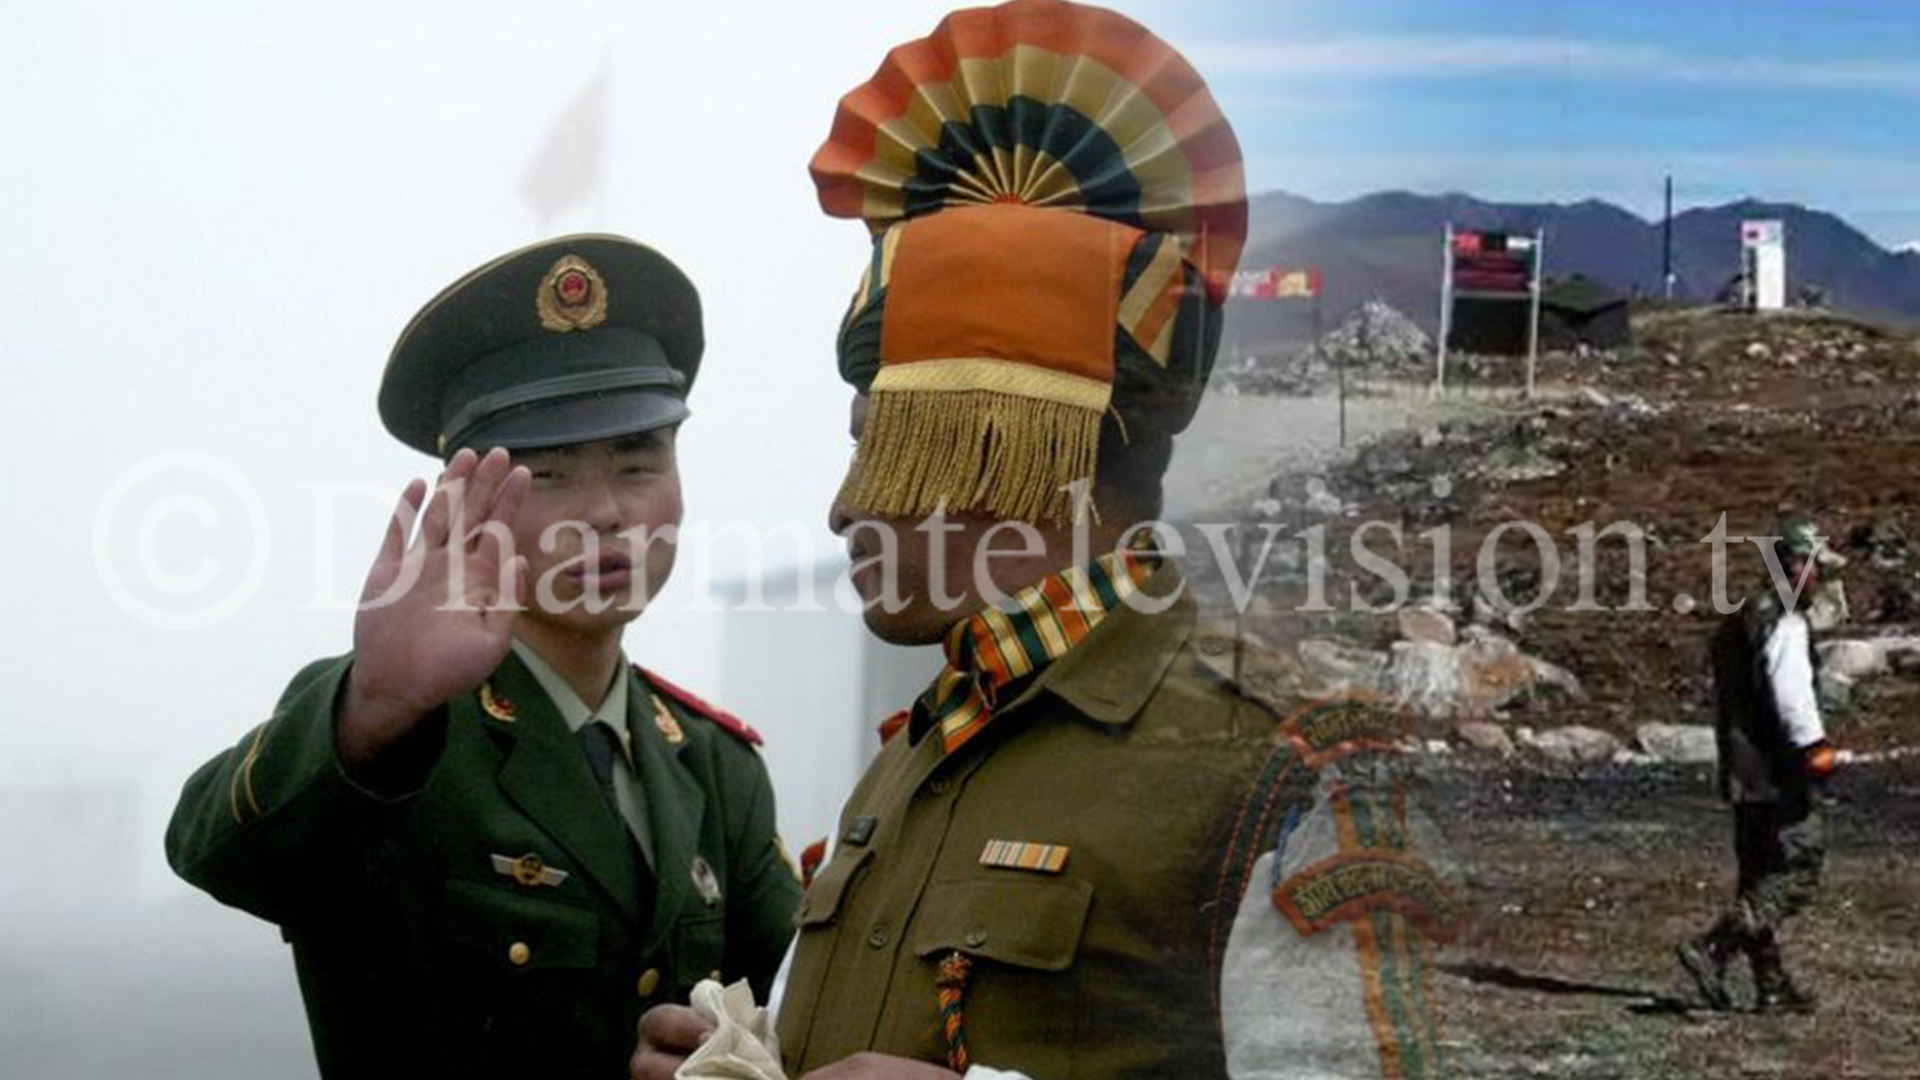 China blames Indian border infrastructures and deployment of military as reason for conflict